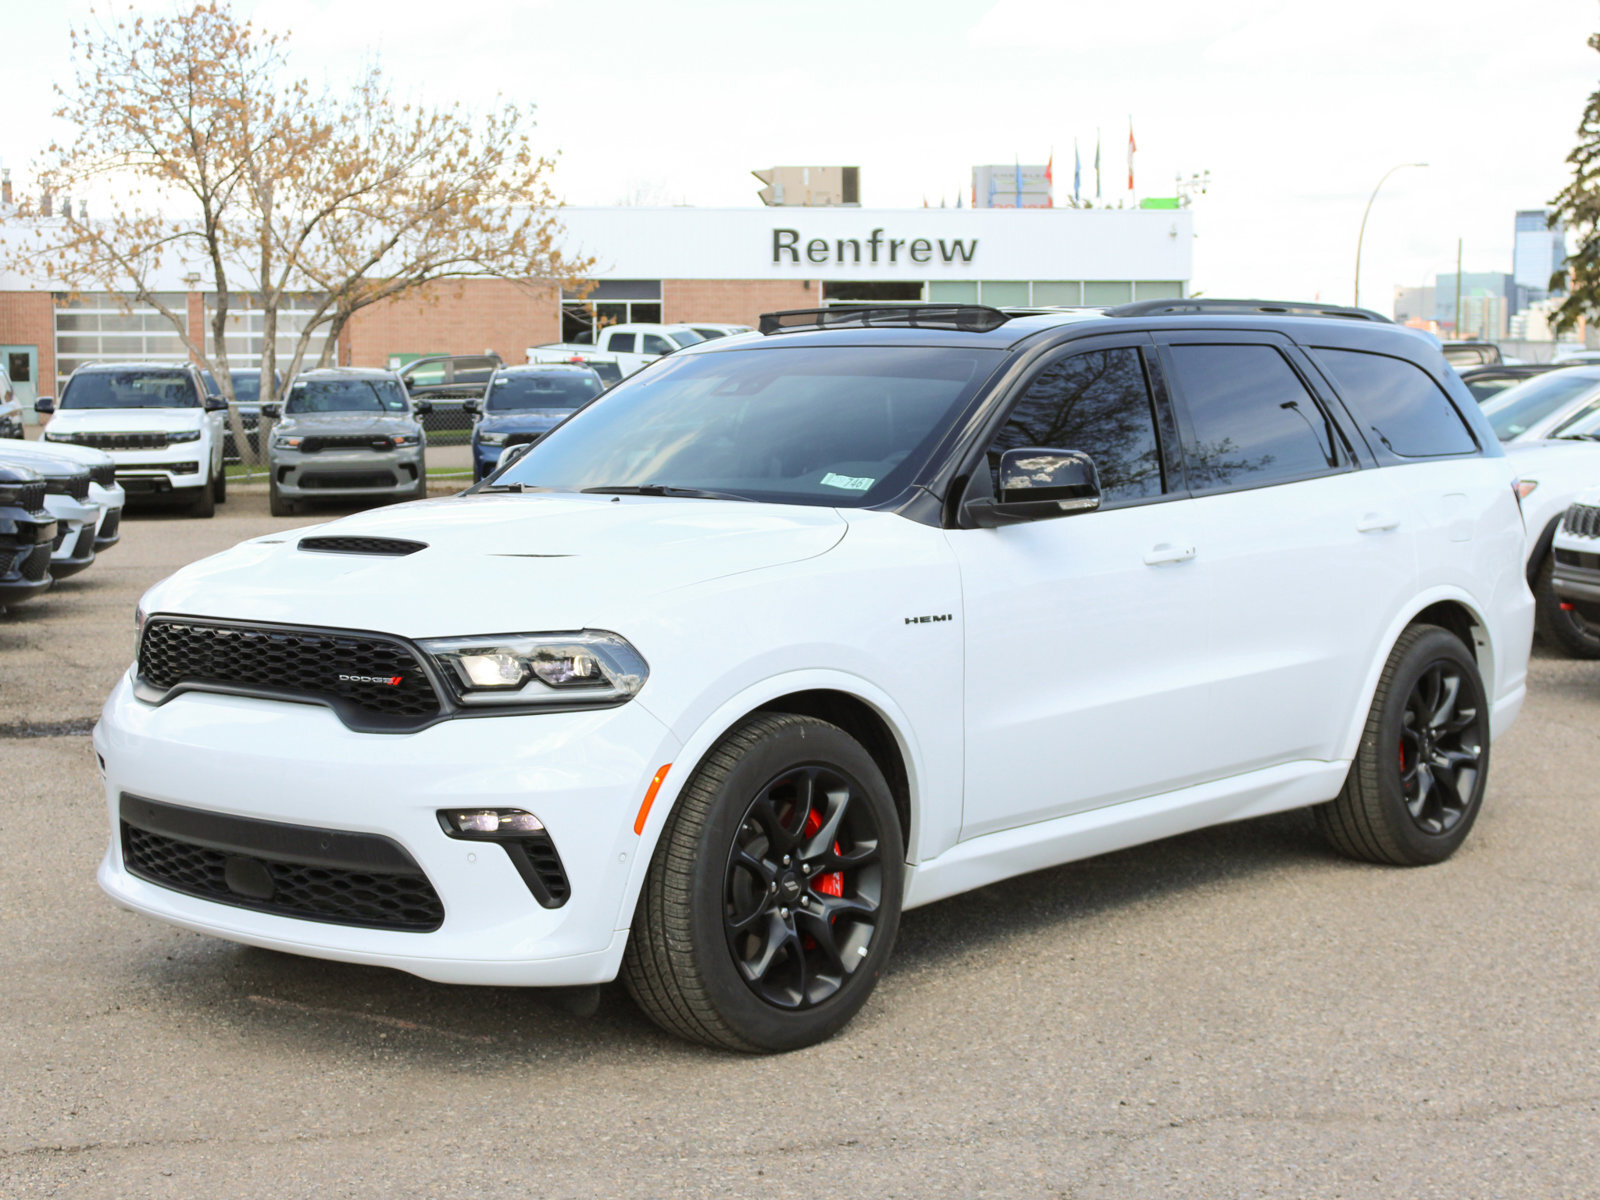 2023 Dodge Durango FULLY LOADED GHOST EDITION! BREMO BRAKES, SUN ROOF